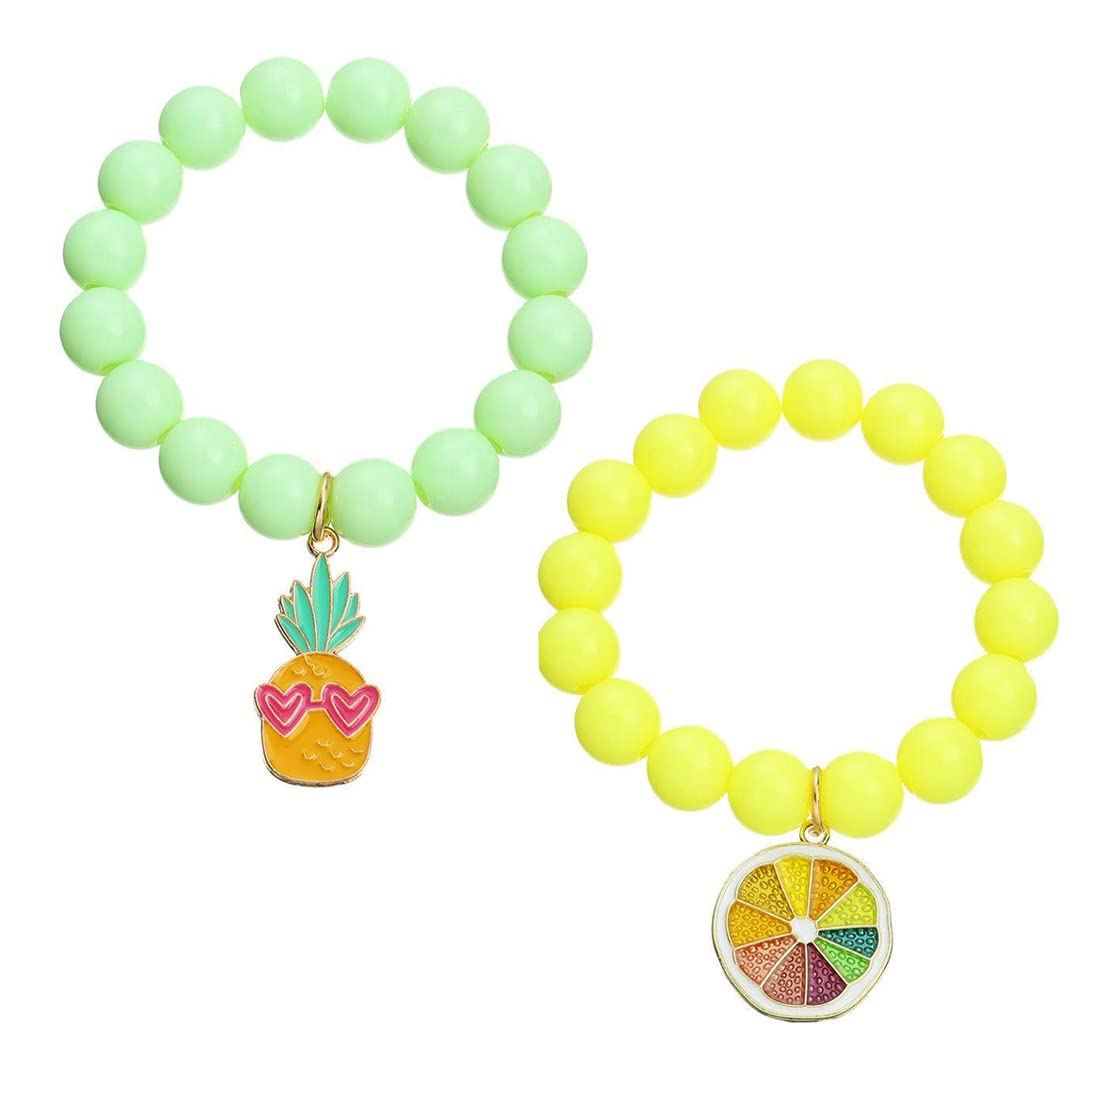 Melbees by Yellow Chimes Bracelet for Girls Kids Charm Bracelets for Girls | Combo of 2 Pcs Candy Colors Beads Bracelet For Girls kids | Birthday Gift For Kids and Girls